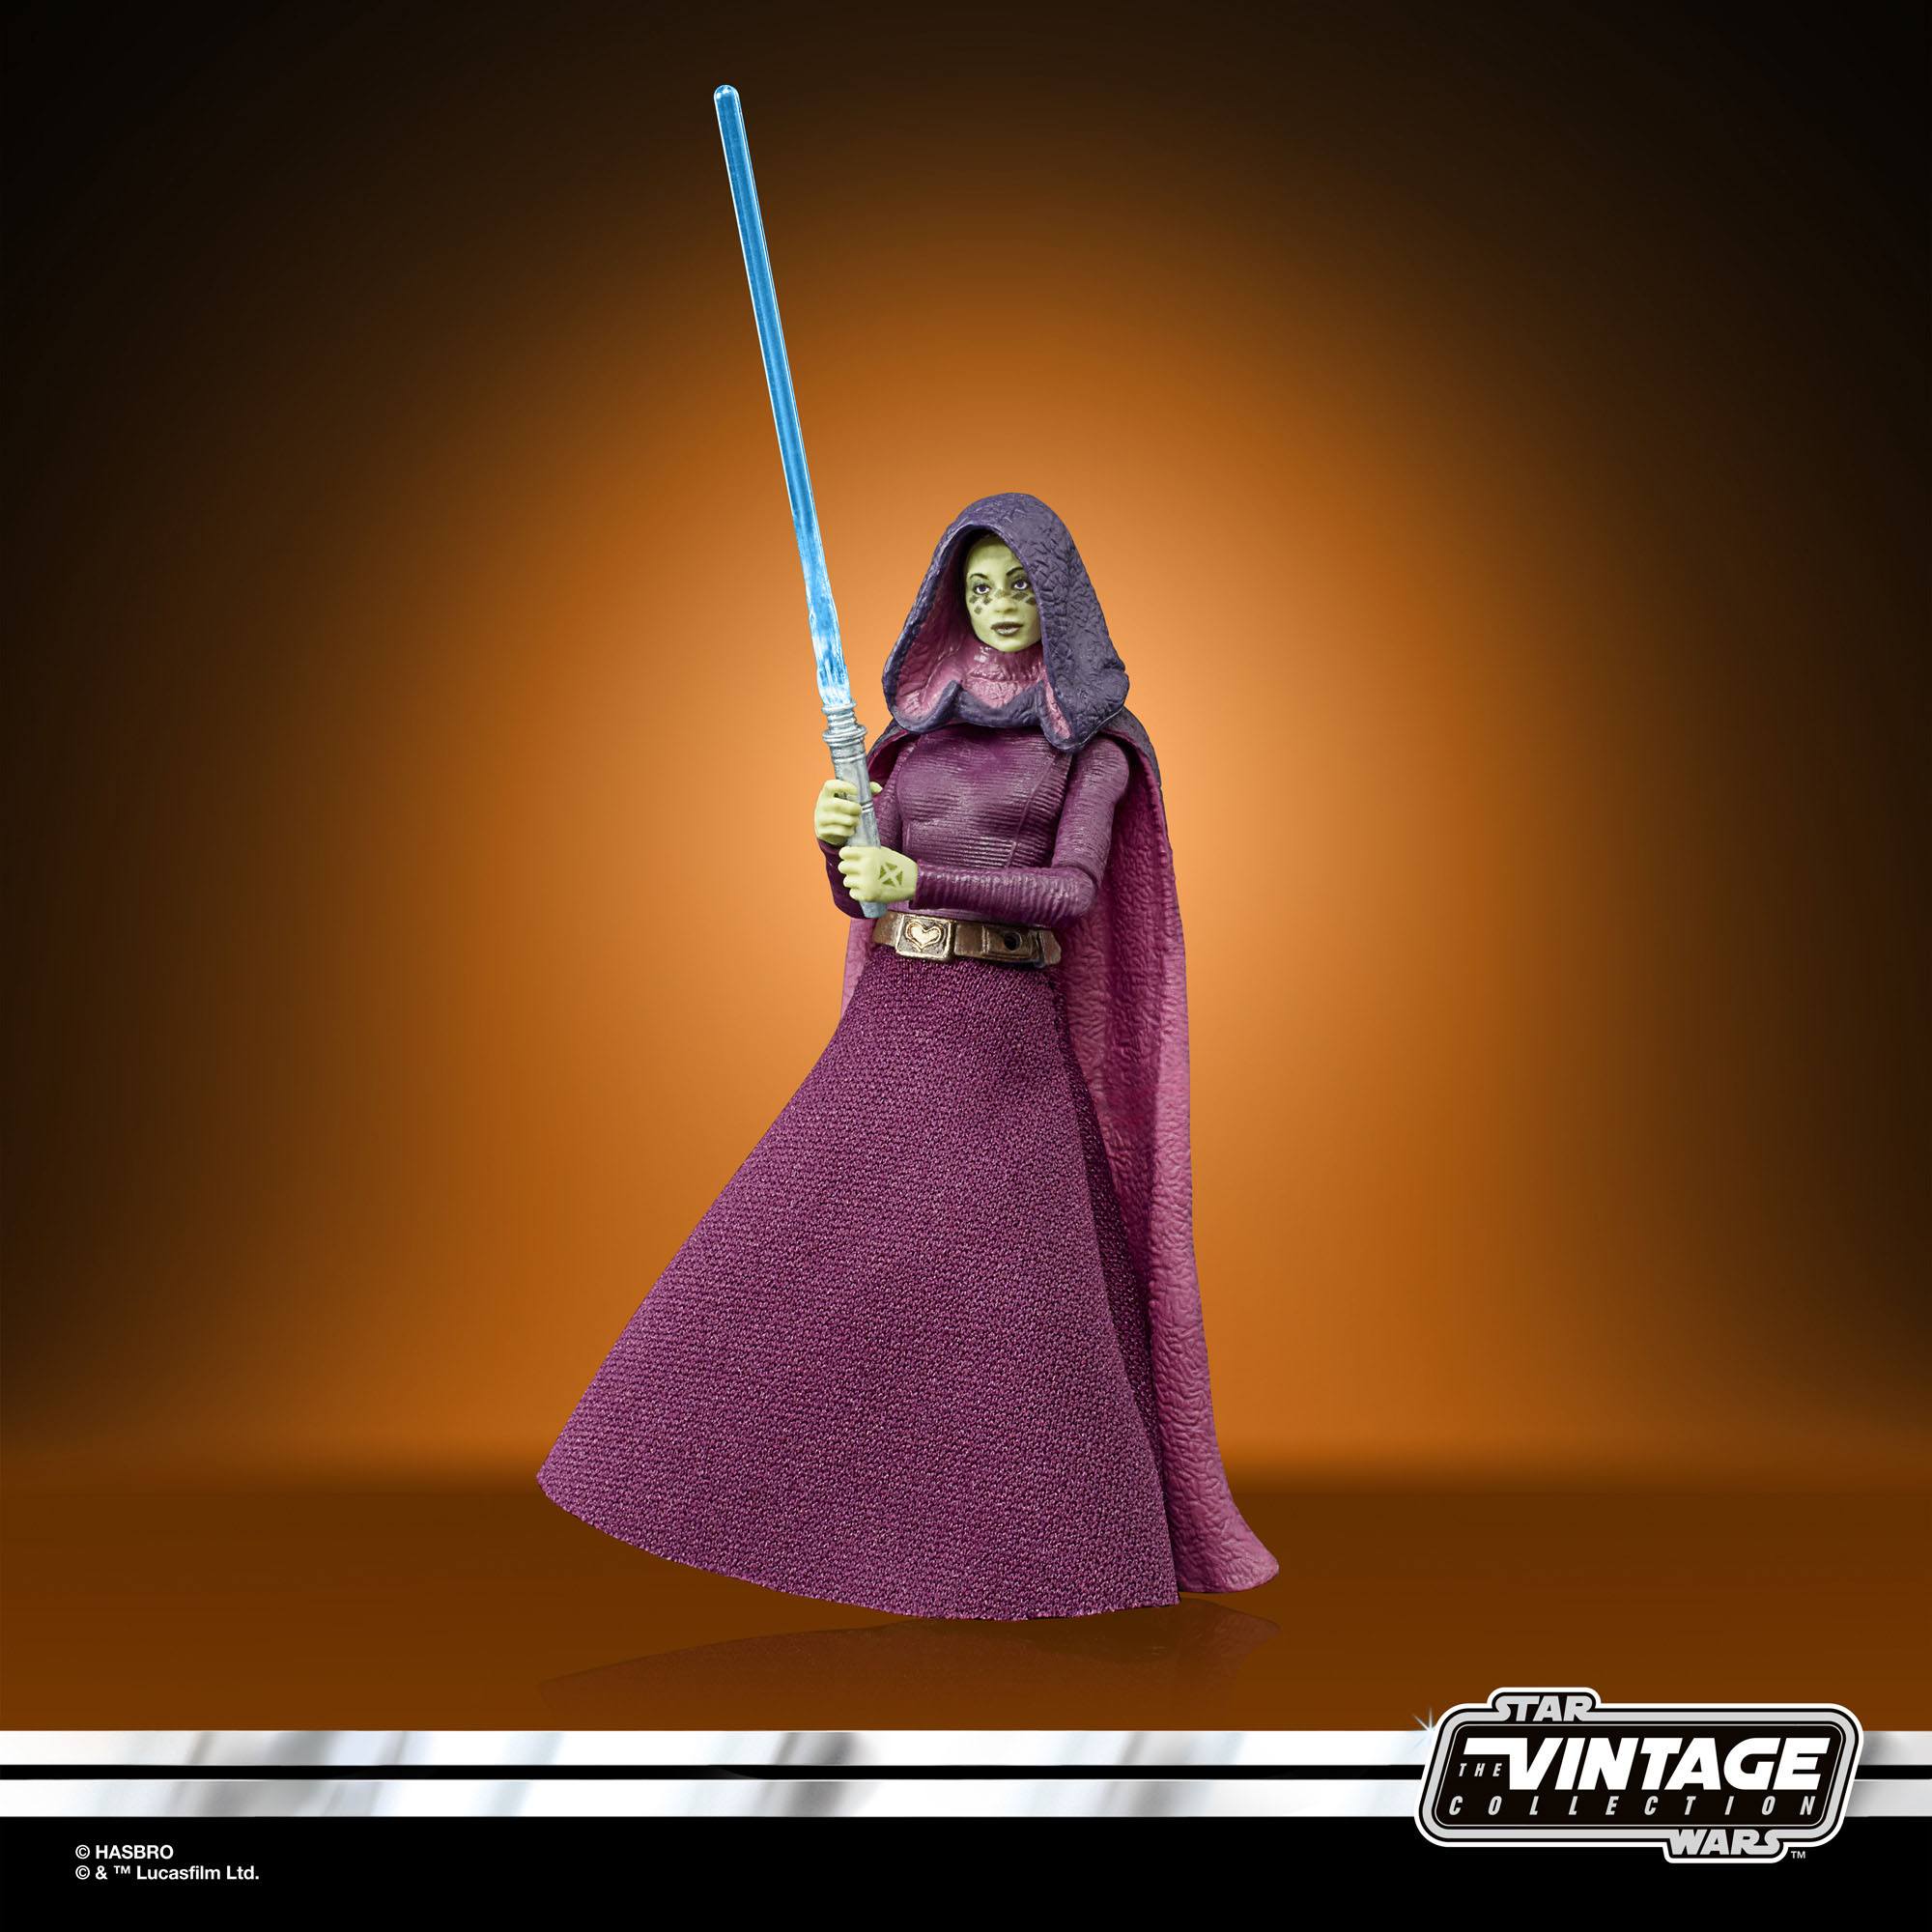 Star Wars The Clone Wars Vintage Collection Actionfigur 2022 Barriss Offee 10 cm F54175L00 5010993980949